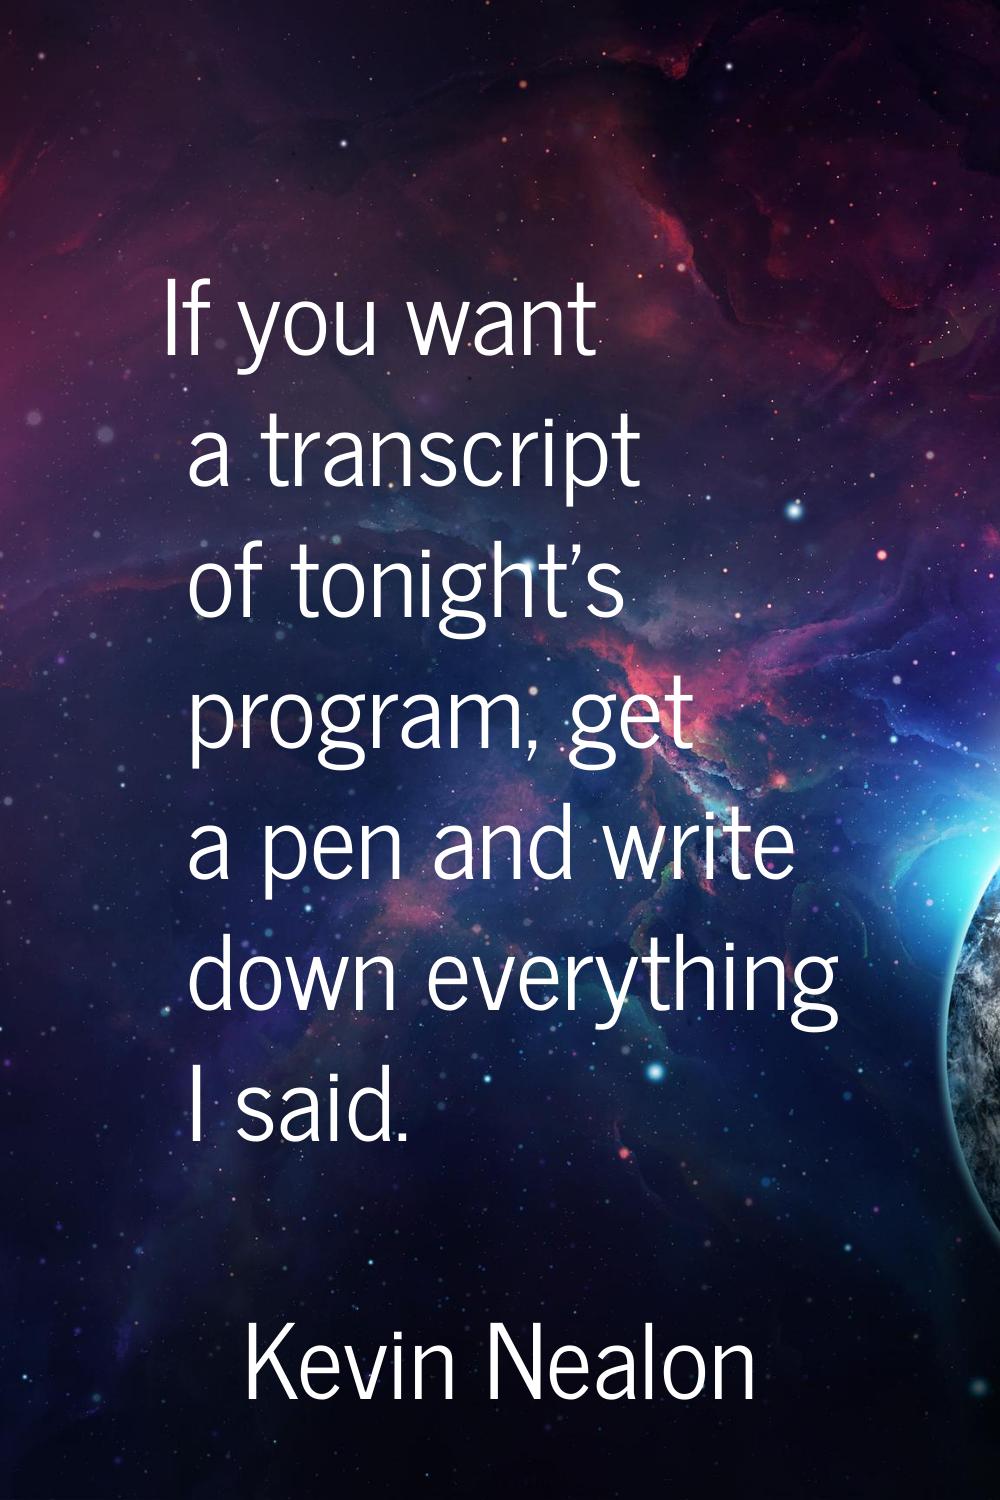 If you want a transcript of tonight's program, get a pen and write down everything I said.